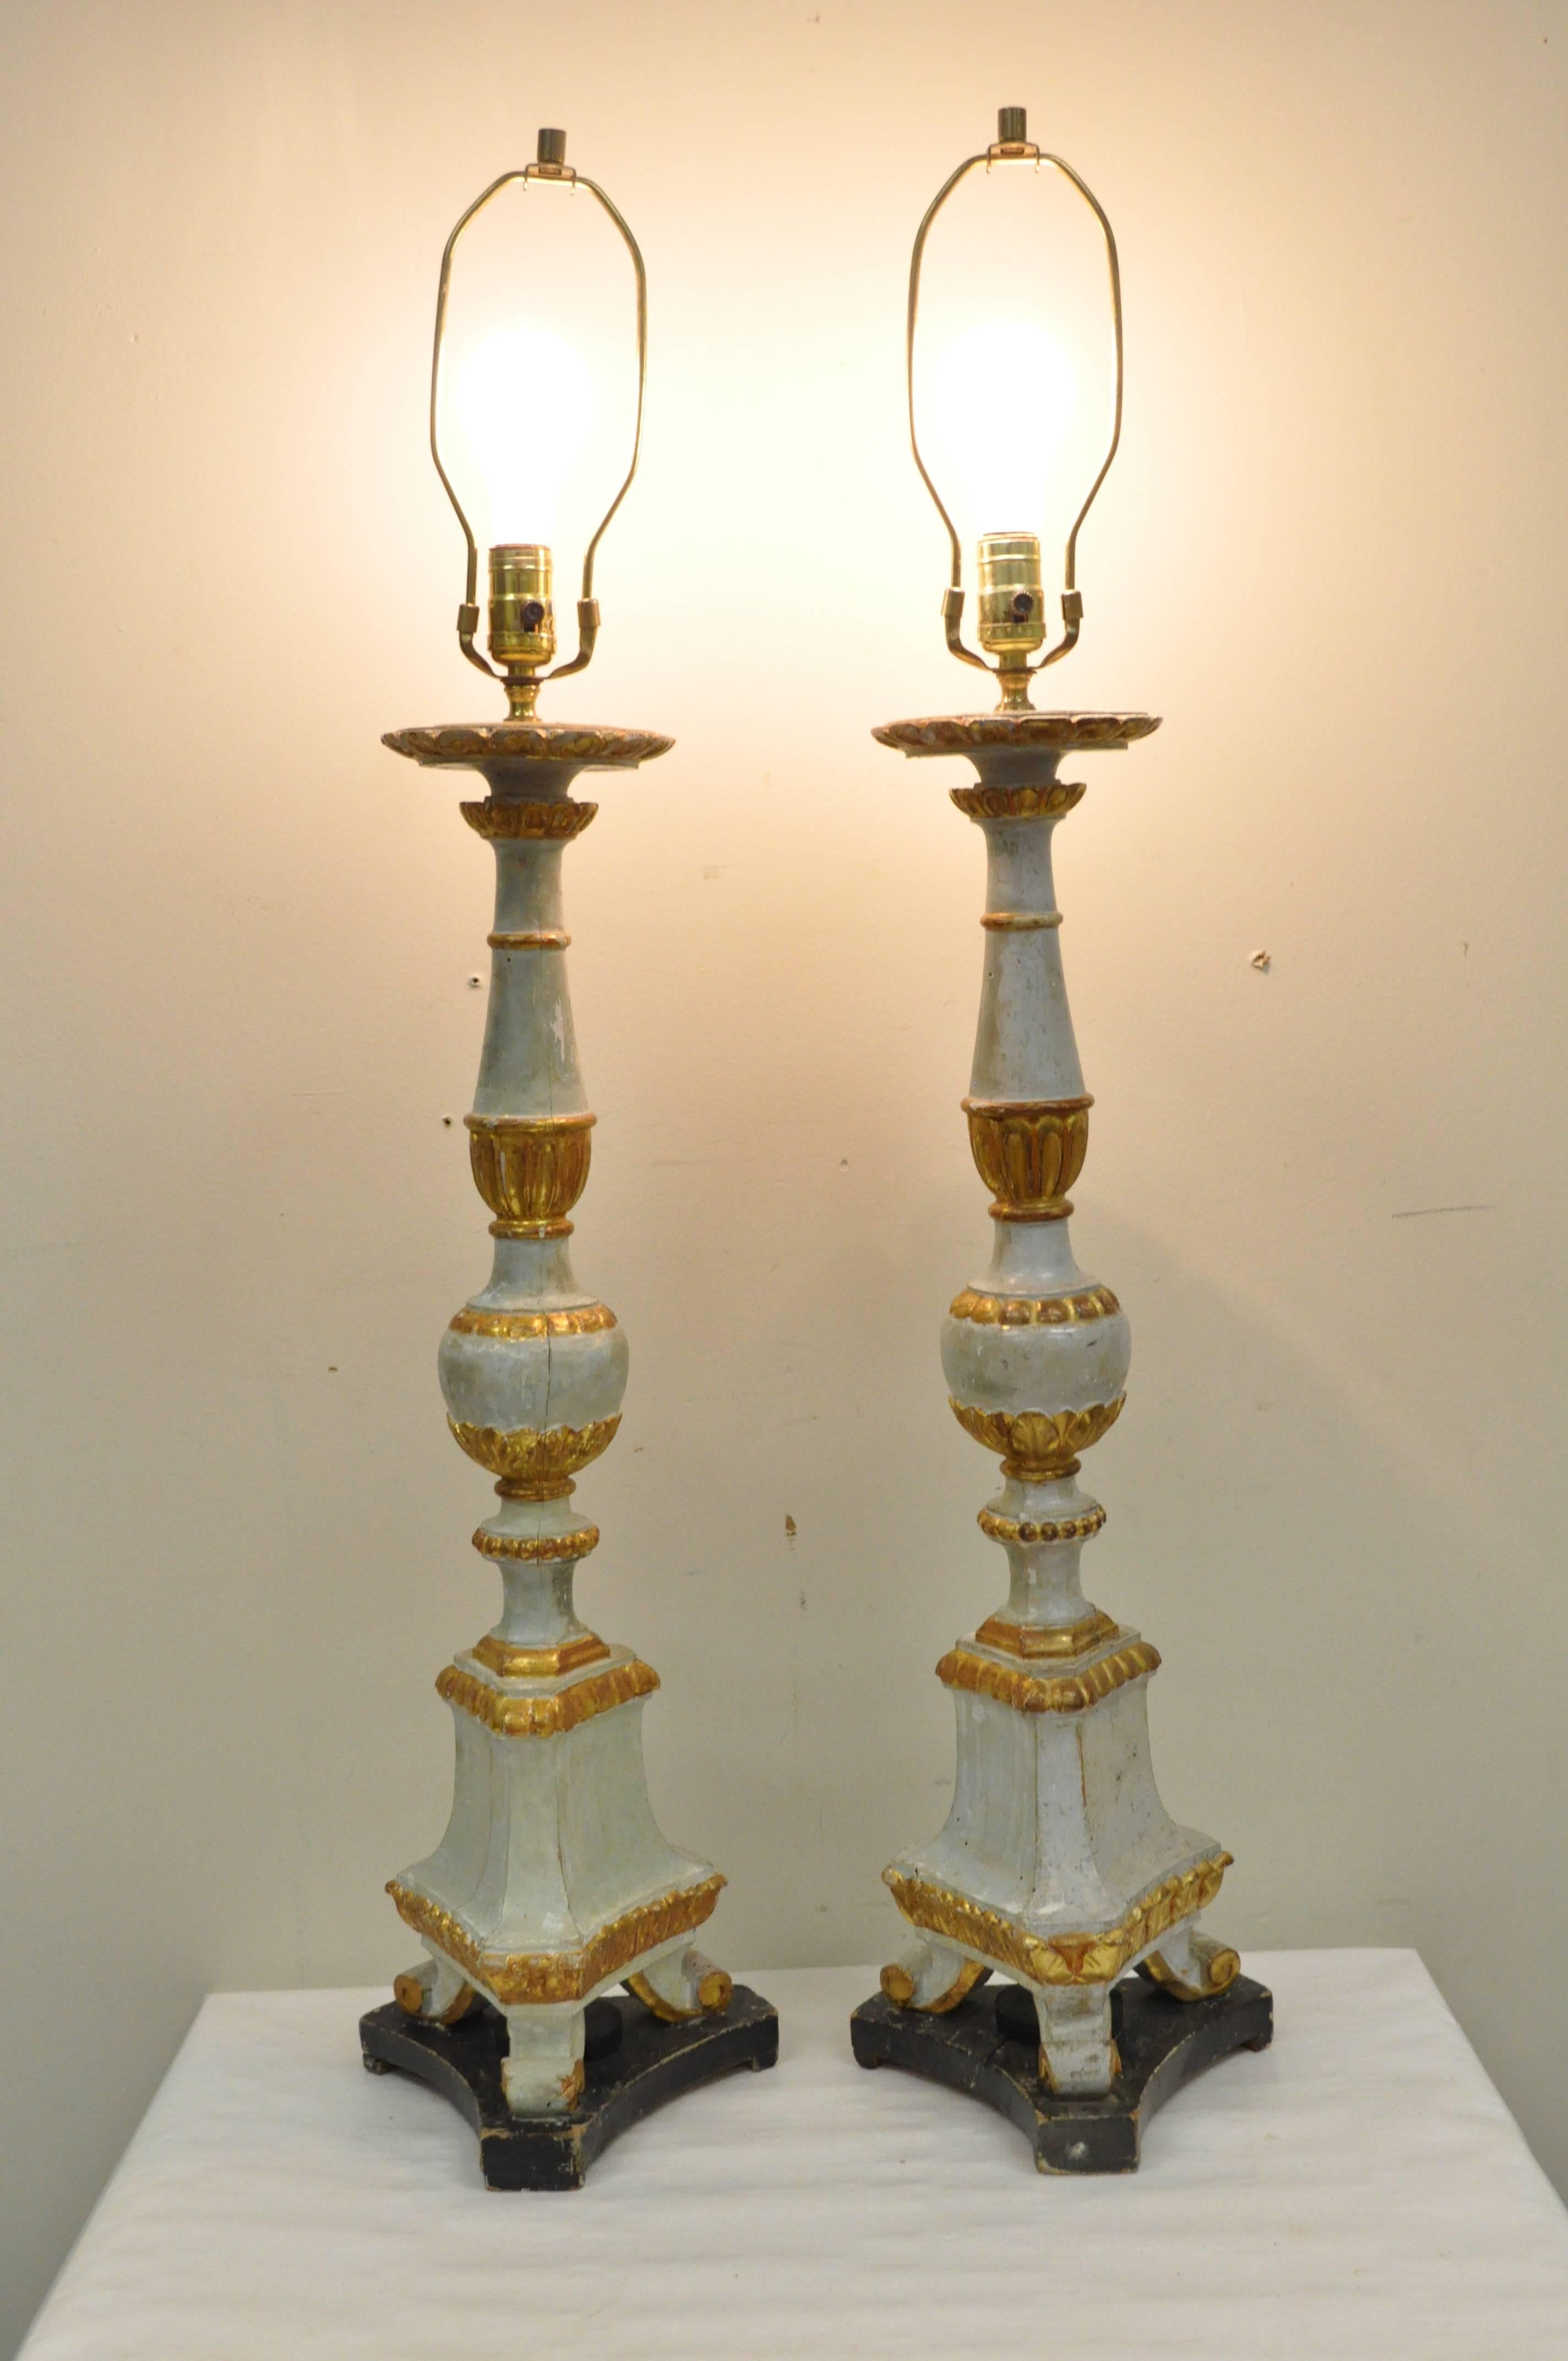 Pair of Early 20th Century Italian Hand-Carved Giltwood Neoclassical Table Lamps For Sale 4